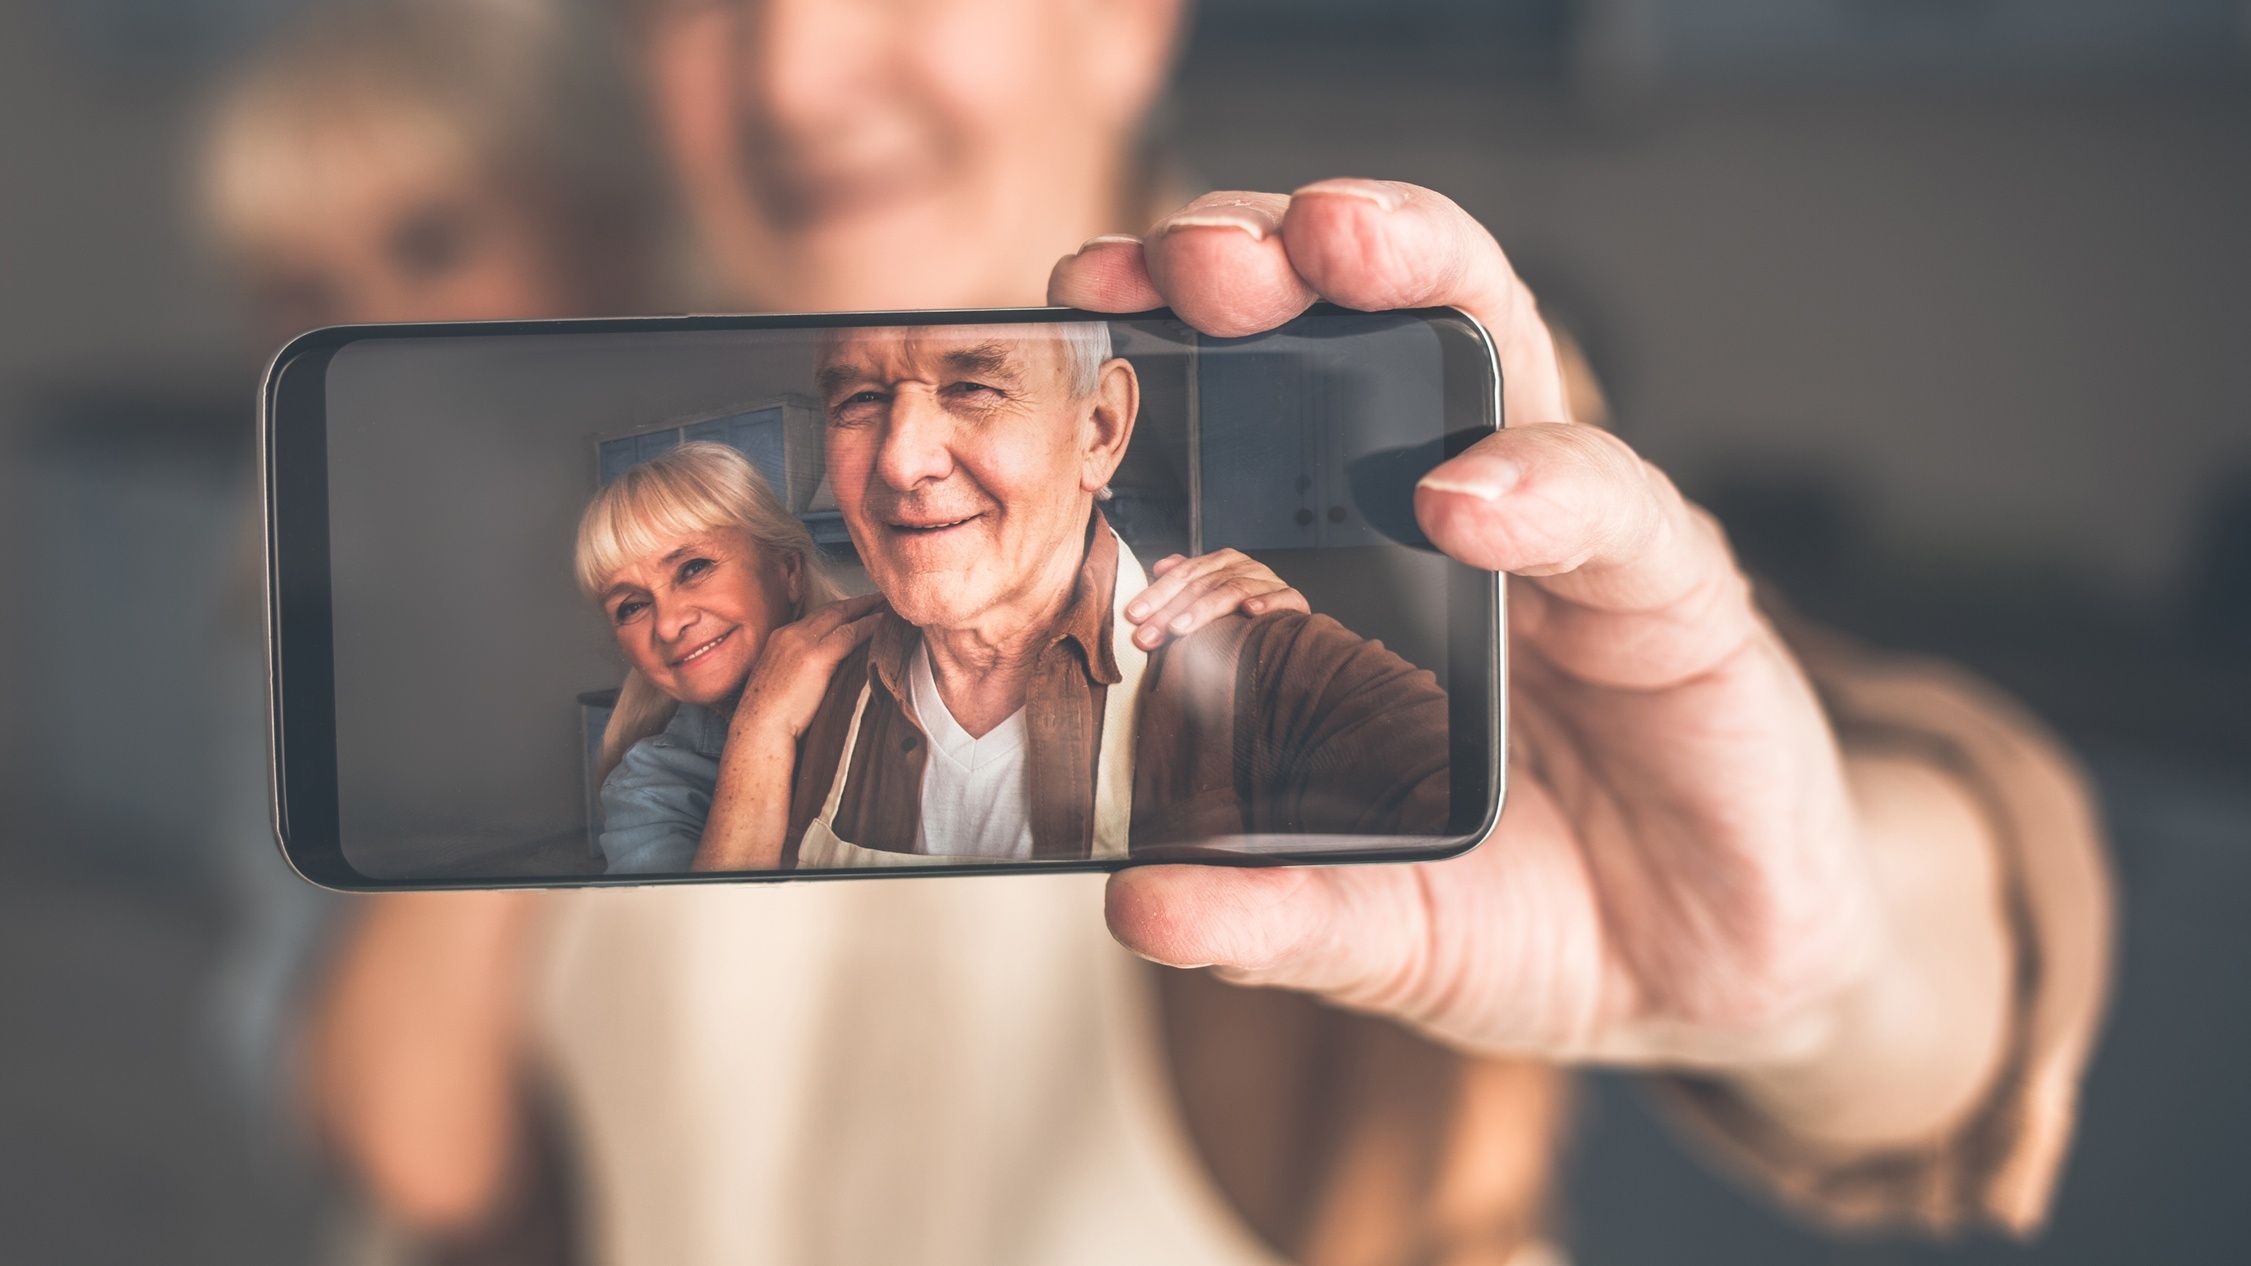 Is old, gold? There are big privacy concerns surrounding the viral Faceapp